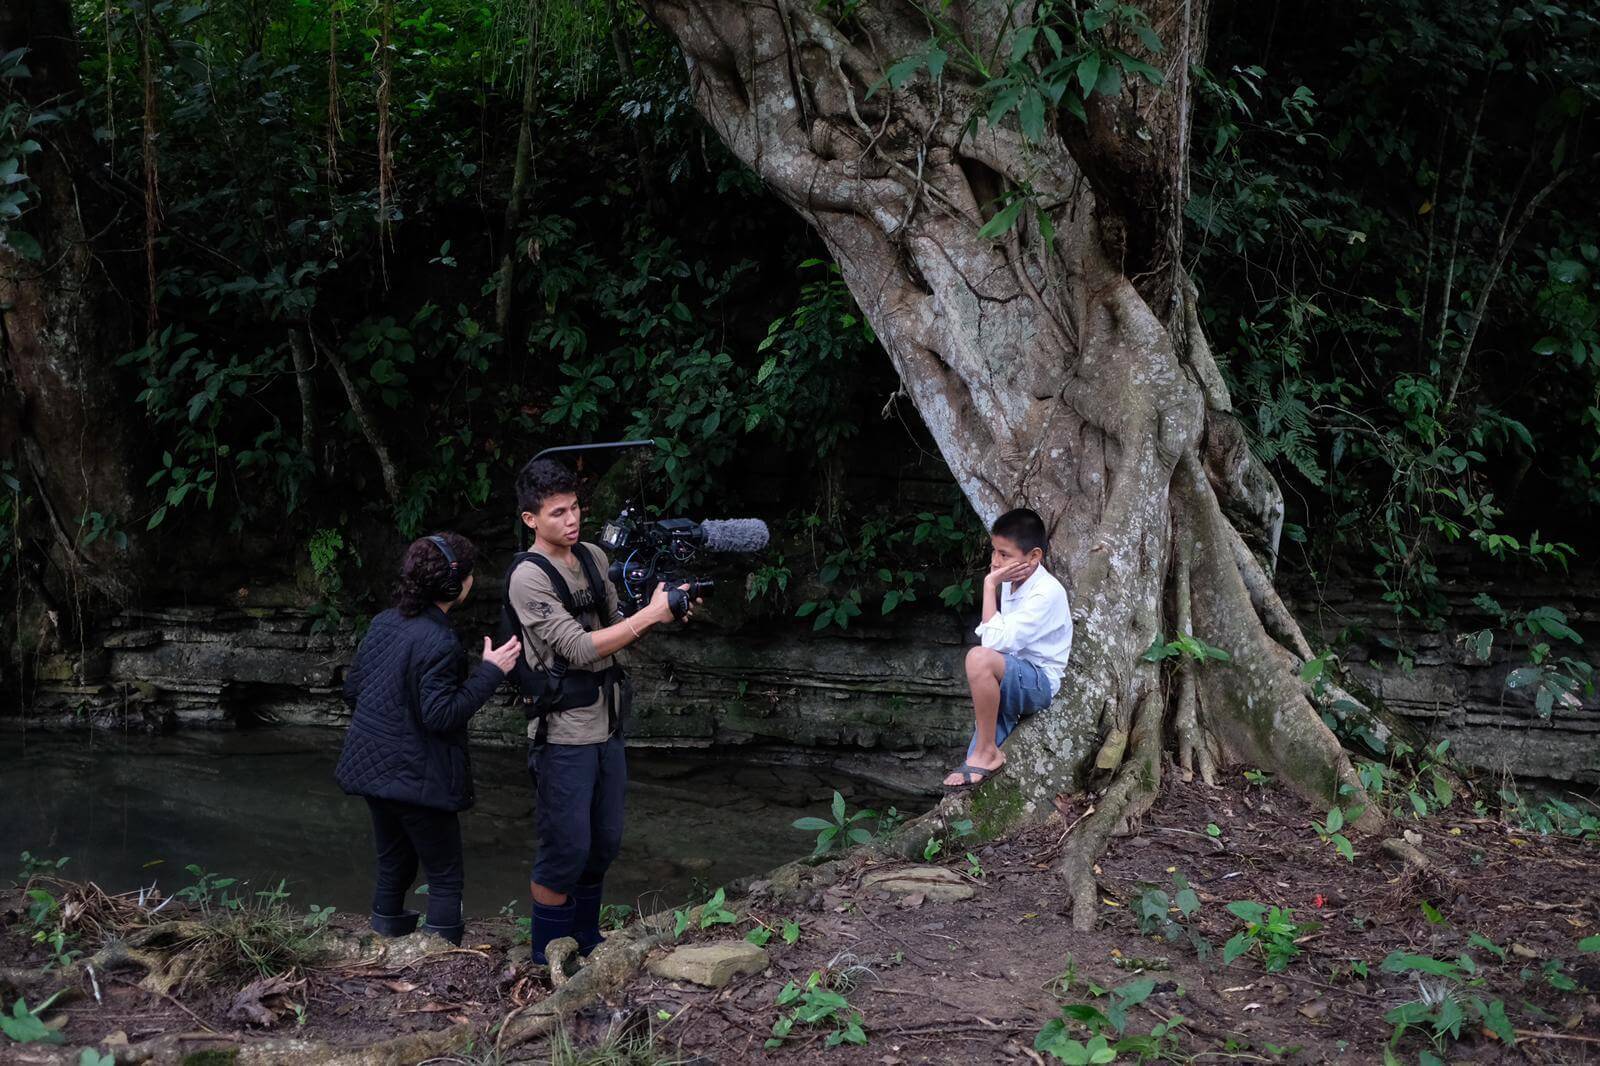 Production still from Silent Beauty. Two persons, one with a camera and the other with a headshot work recording a young boy leaning on a big tree. They are surrounded by nature.